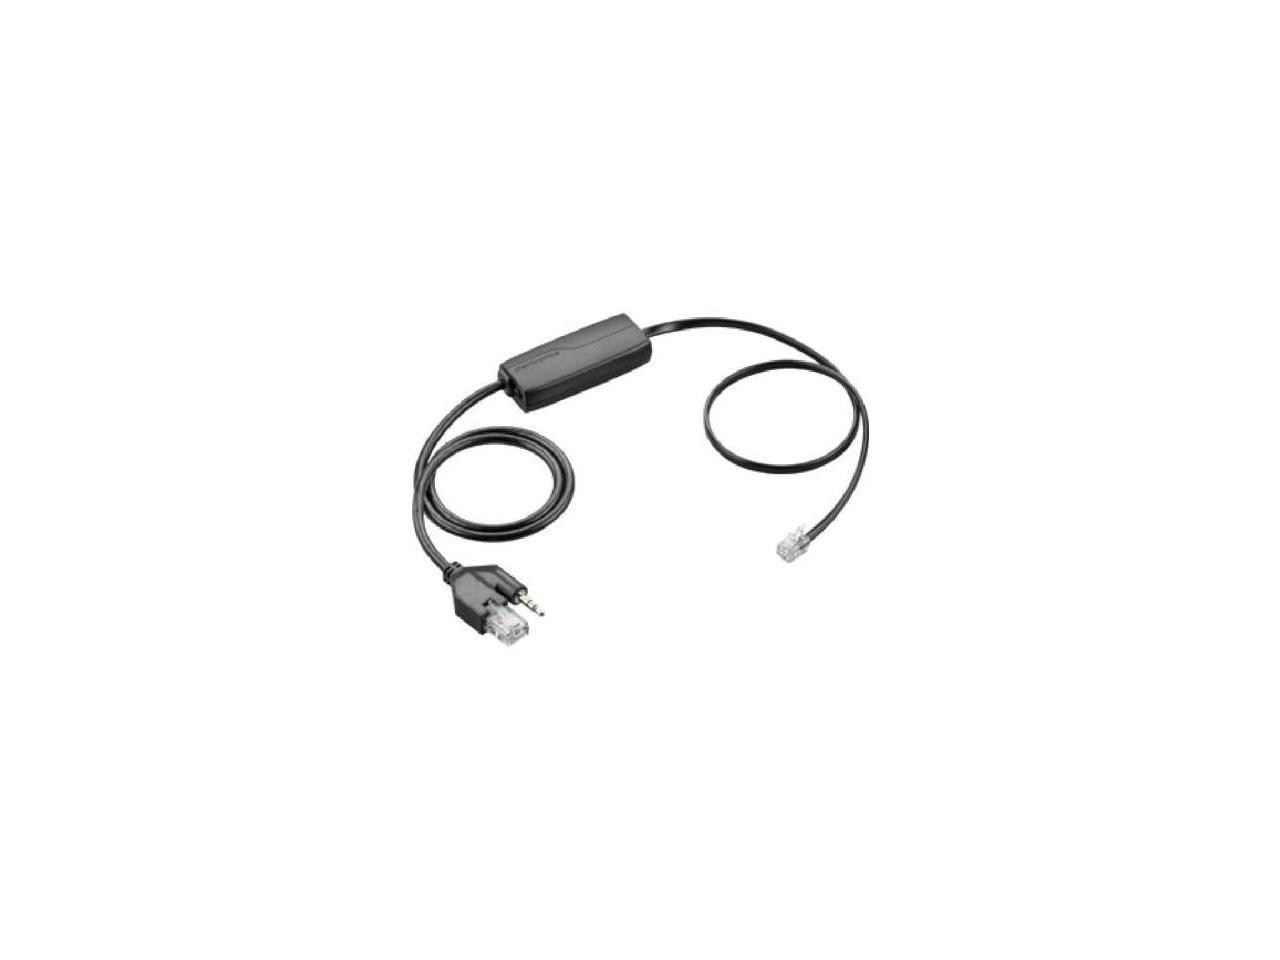 Plantronics 87327-01 Apd-80 Cs500 Headset Adapter Cable for sale online 